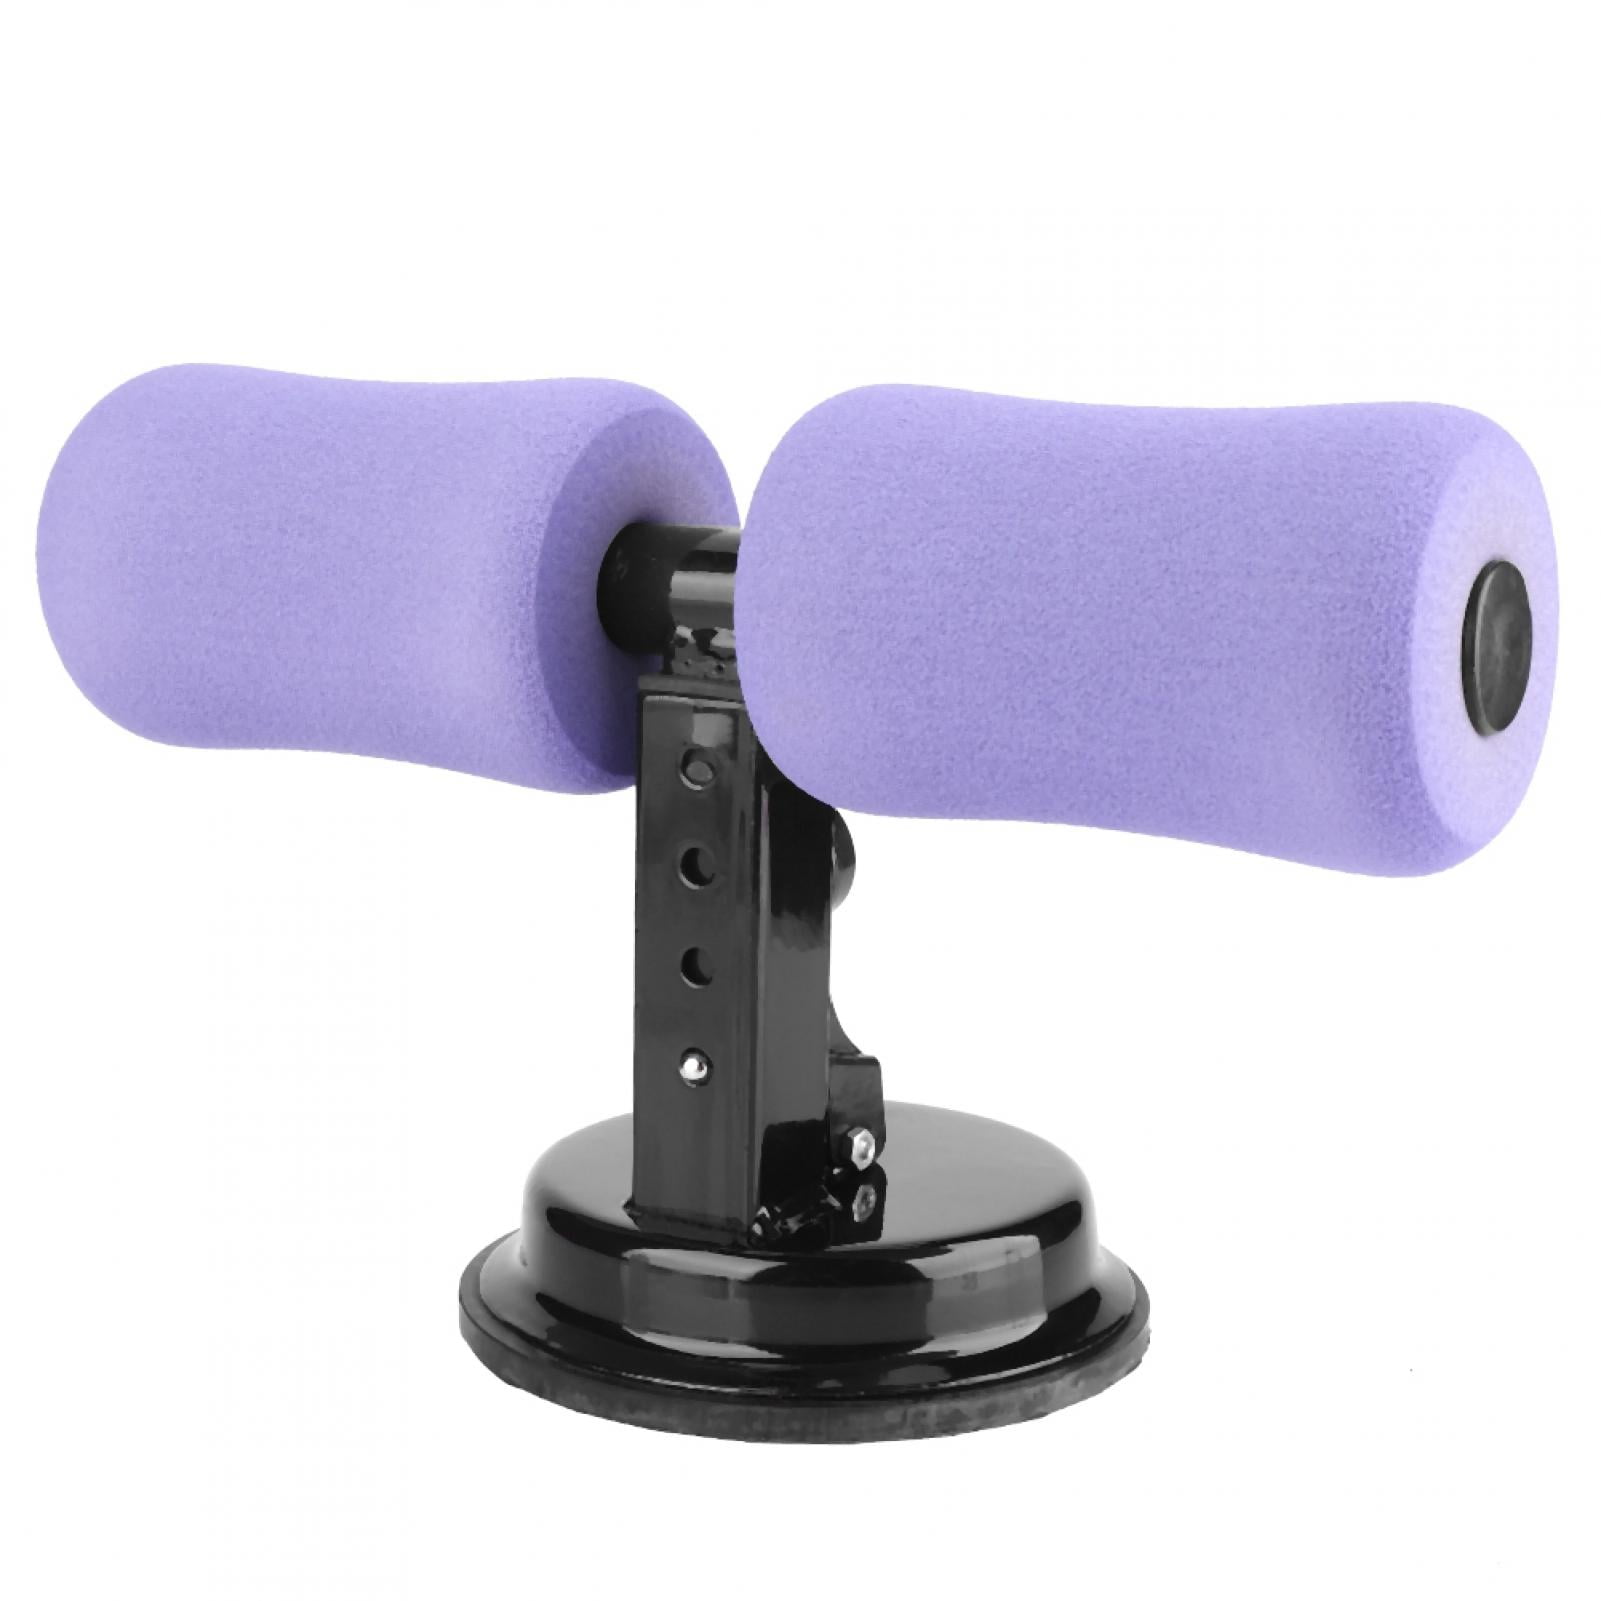 Sit-Up Bar,Portable Double Suction Cups Aid Belly Leg Abdominal Training tool